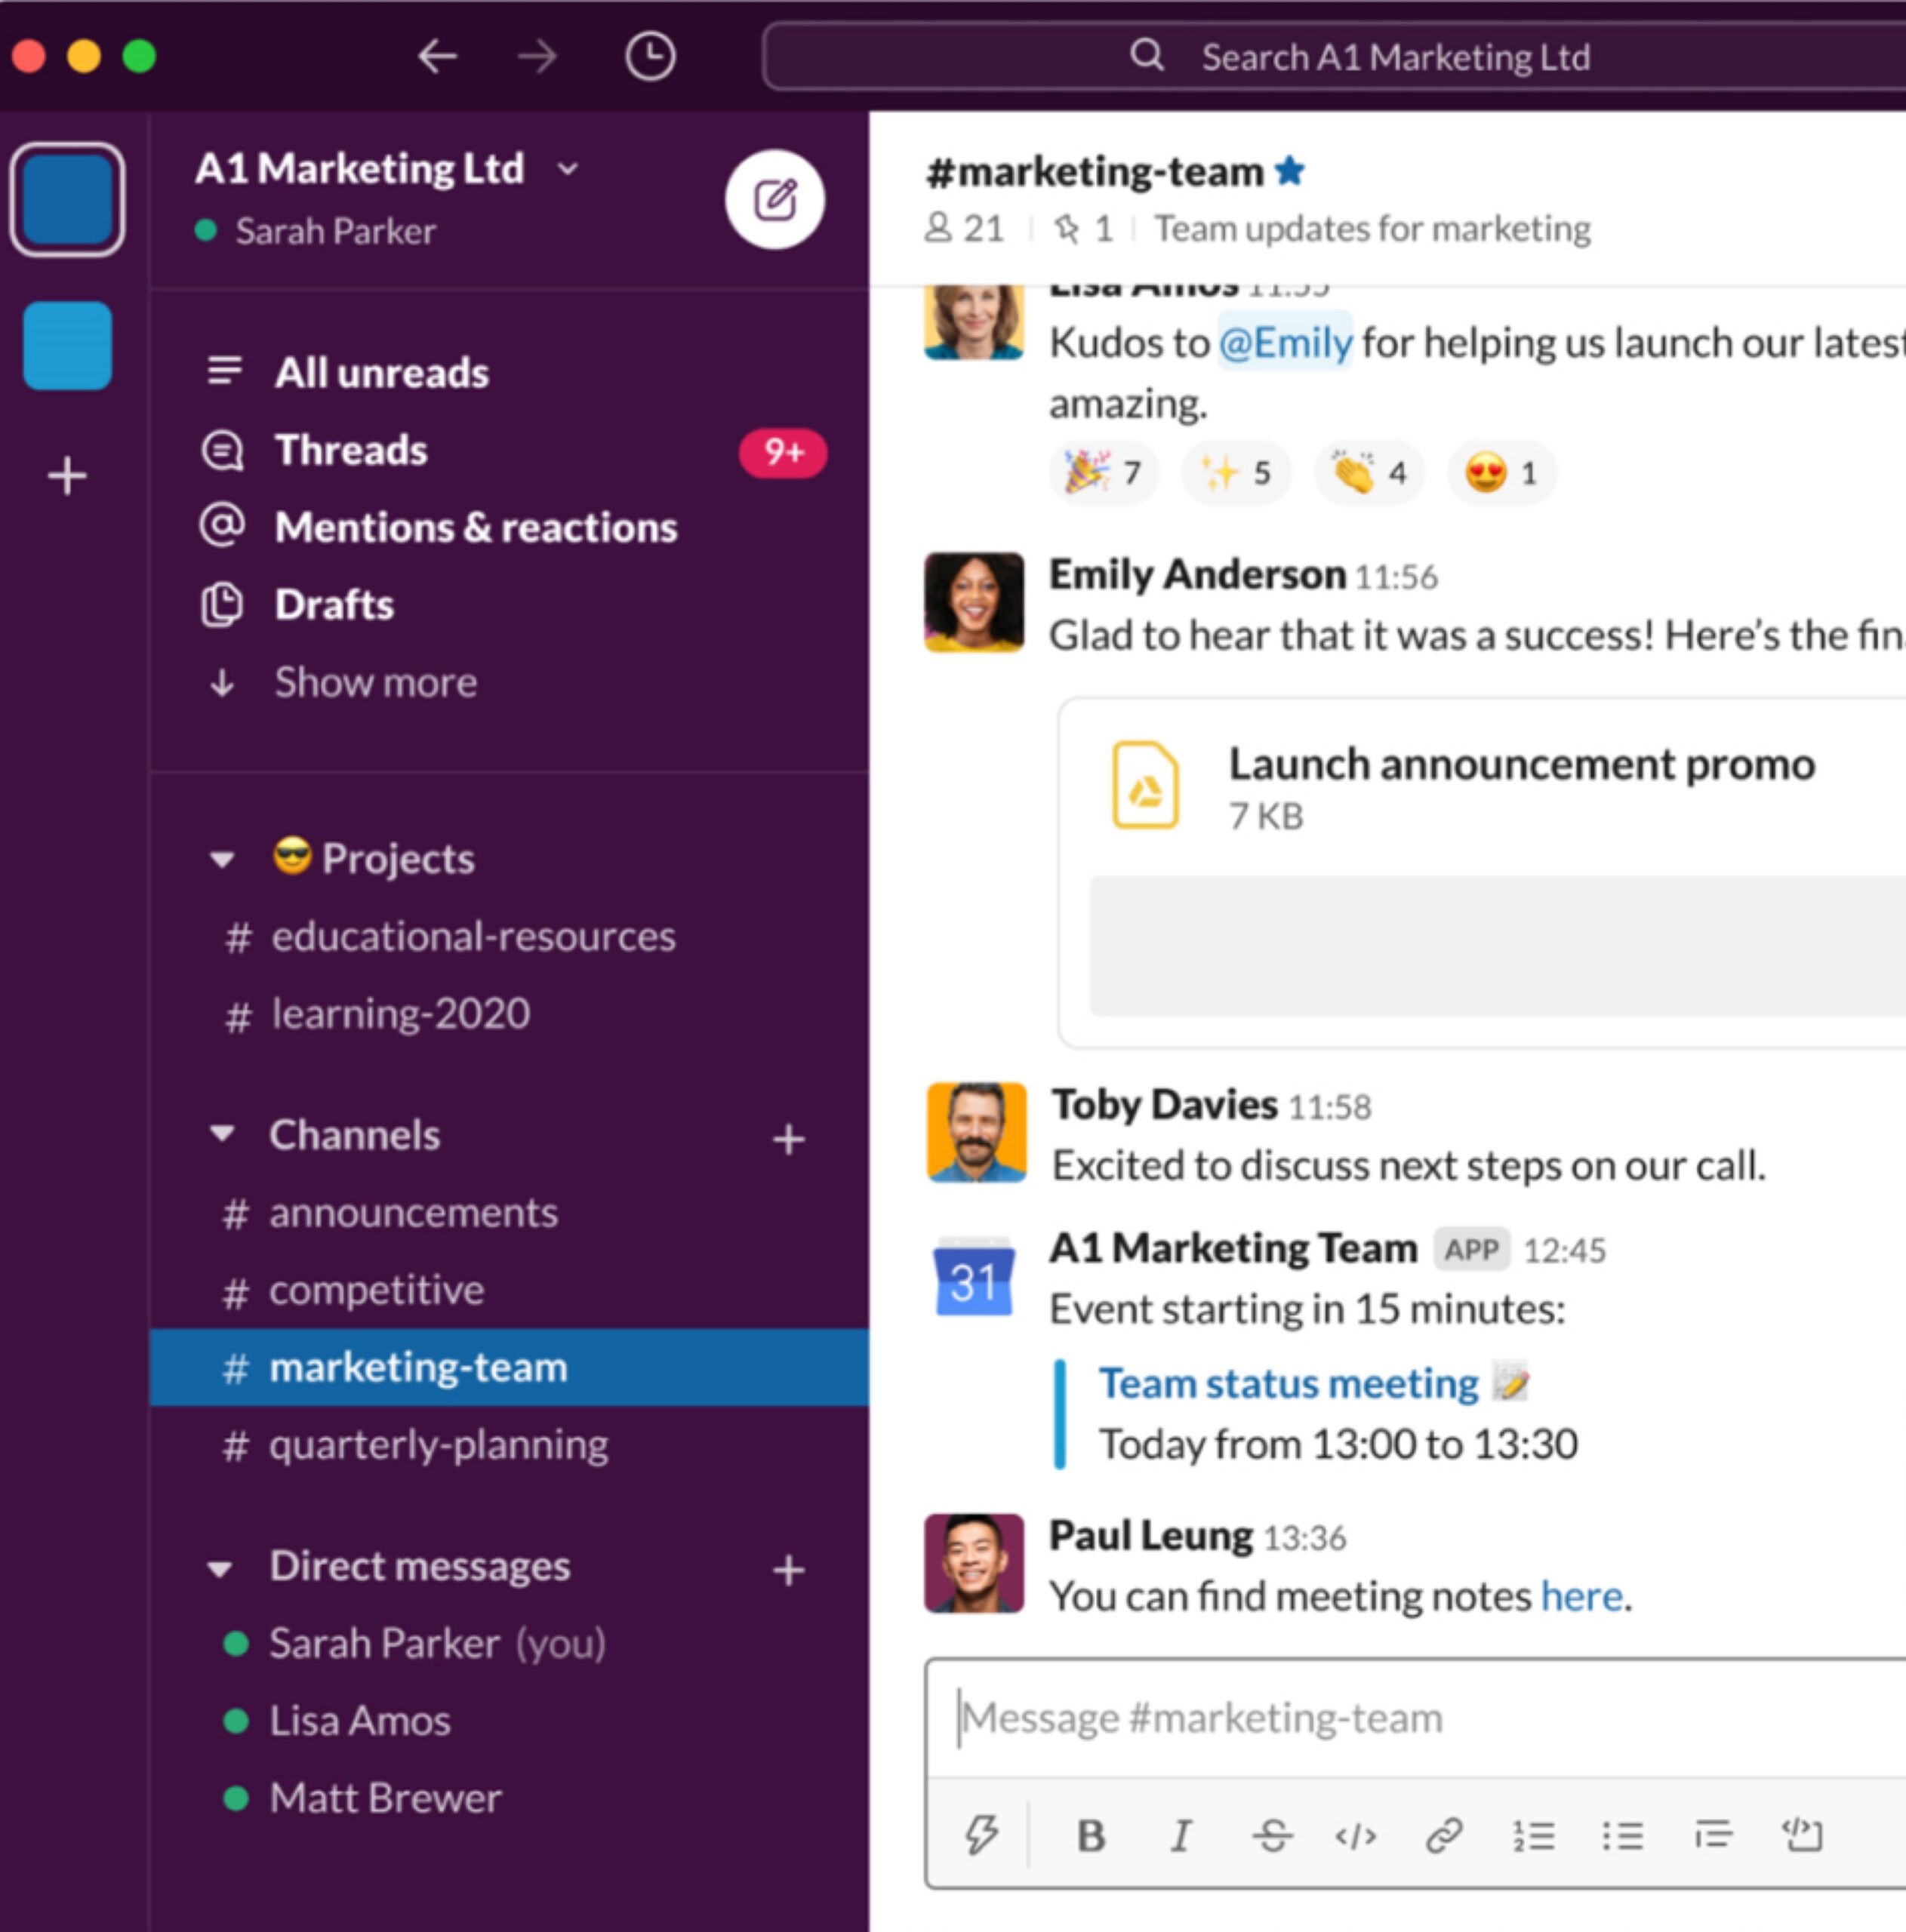 Screen shot of the rich slack interface showing emojis, profile images and lots of interaction